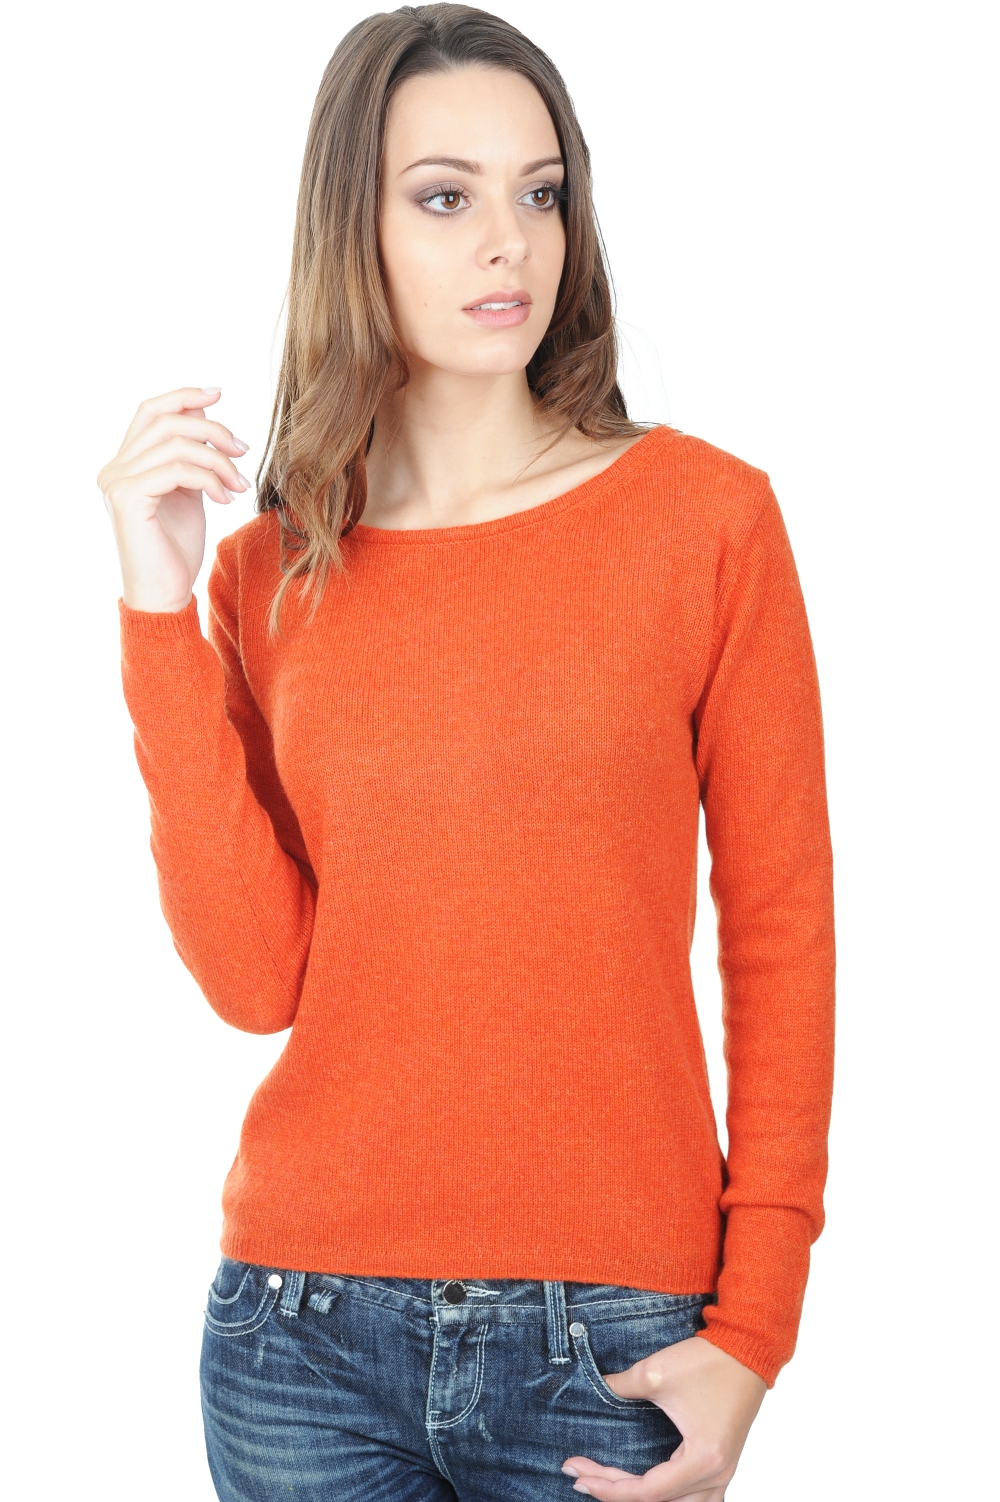 Cashmere ladies basic sweaters at low prices caleen paprika 4xl